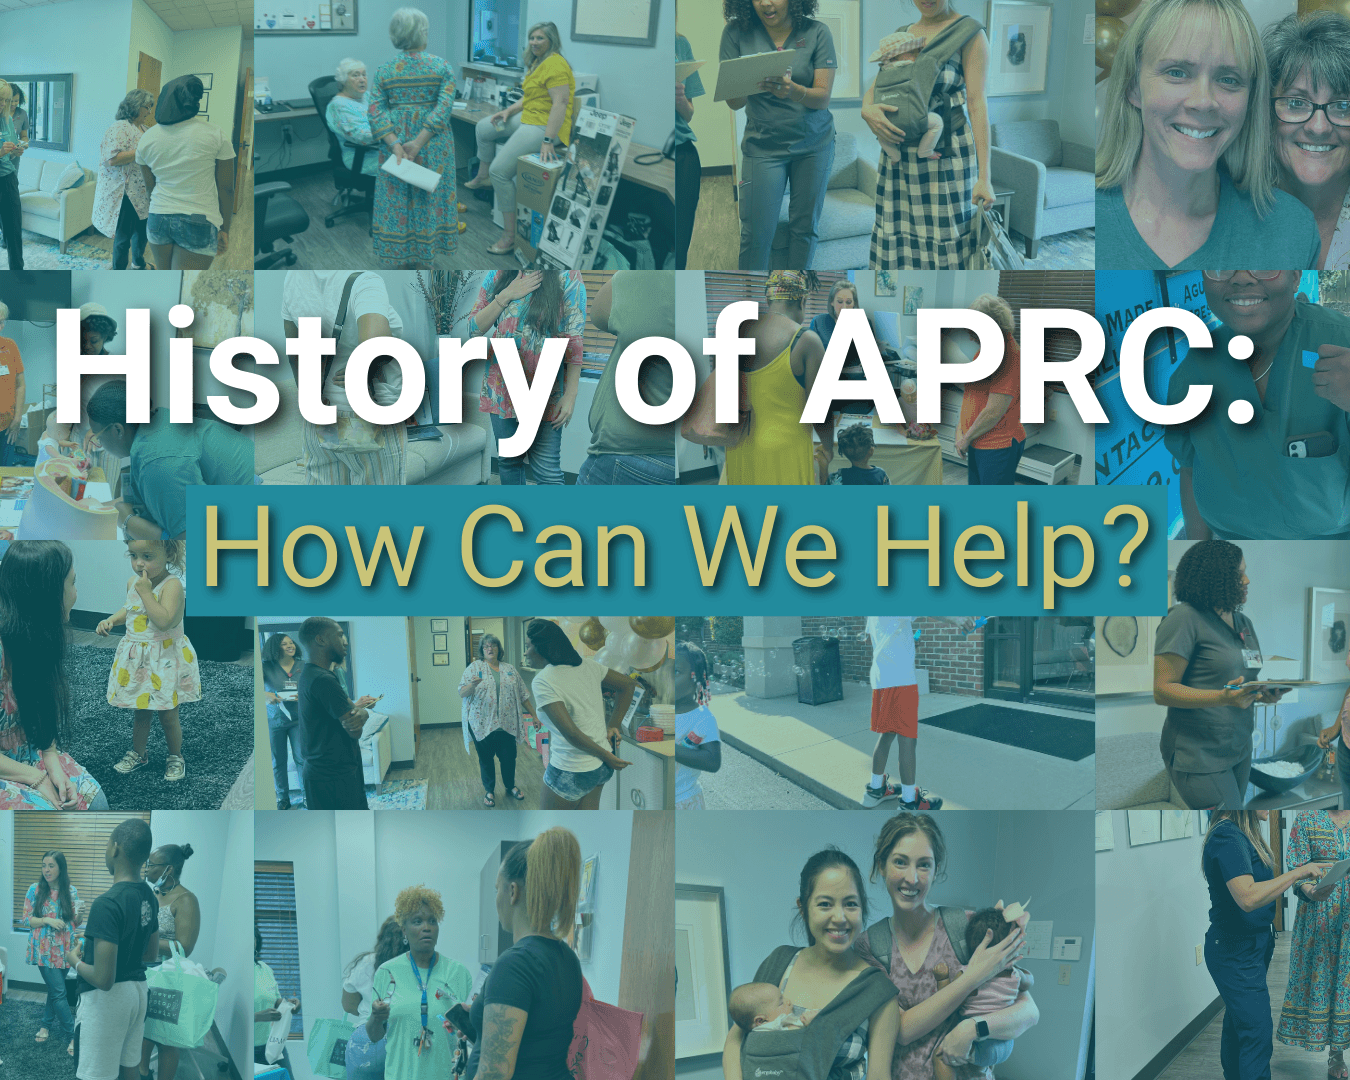 History of APRC: How Can We Help?